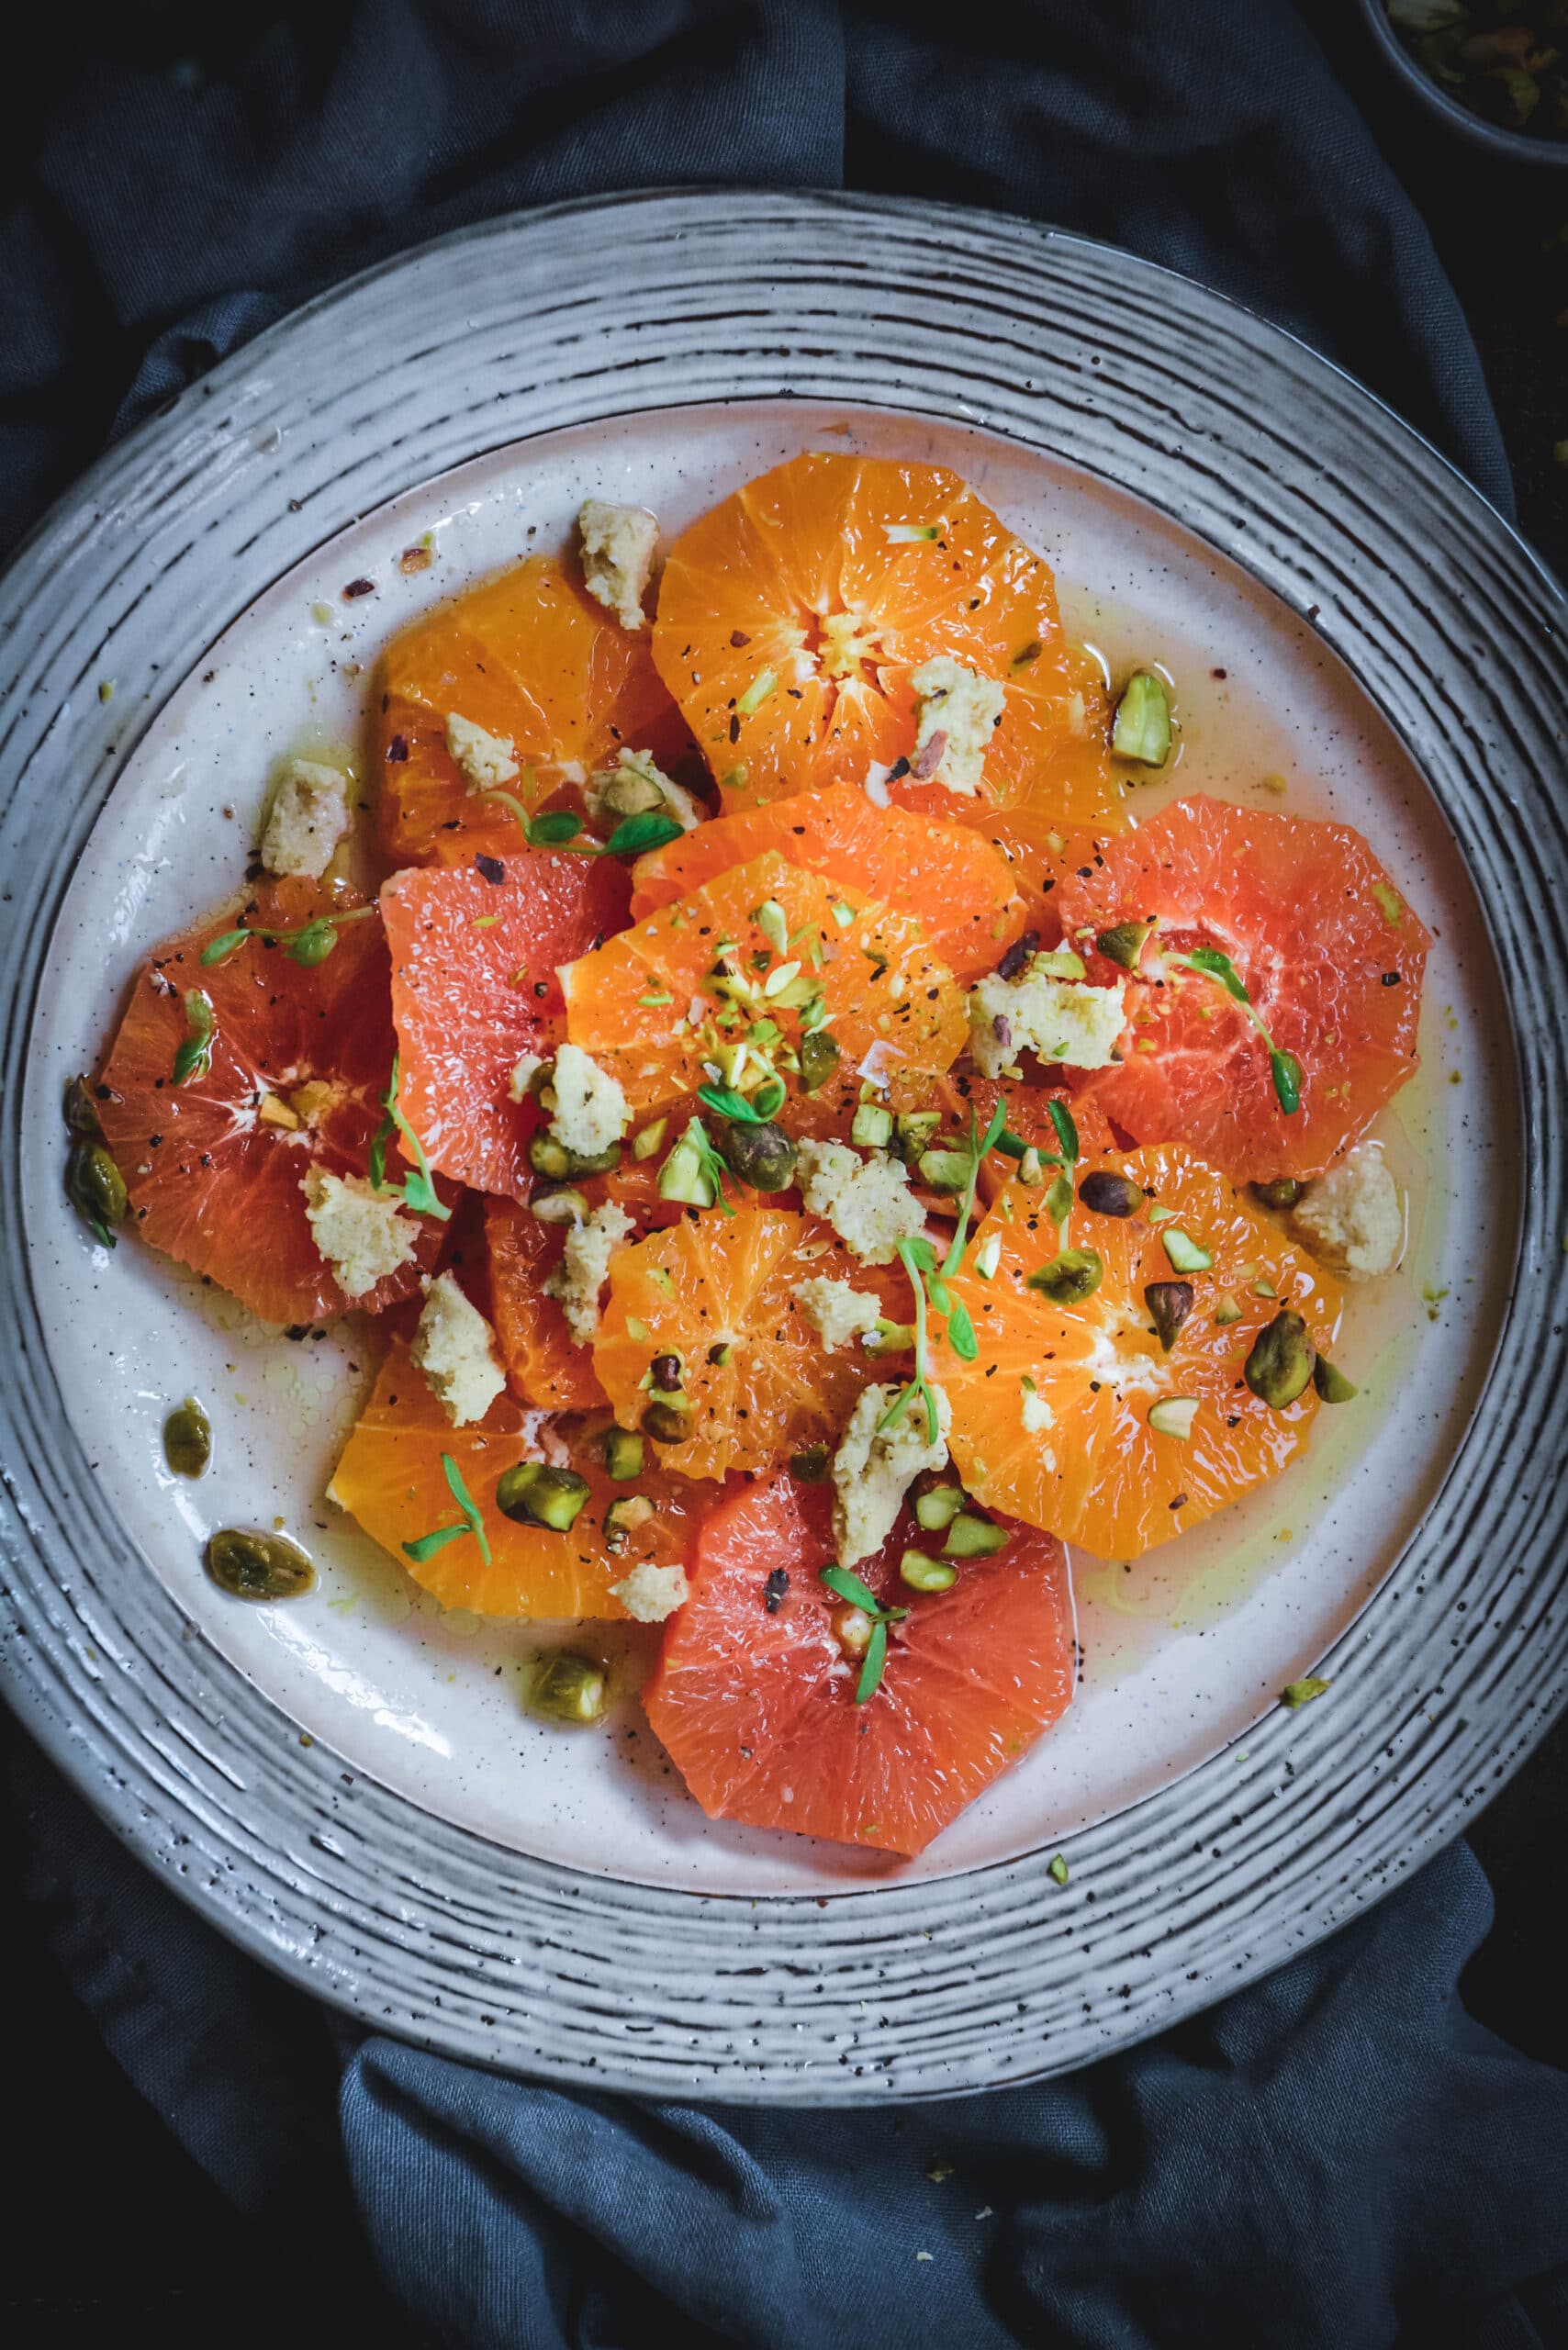 citrus slices on a plate topped with seeds